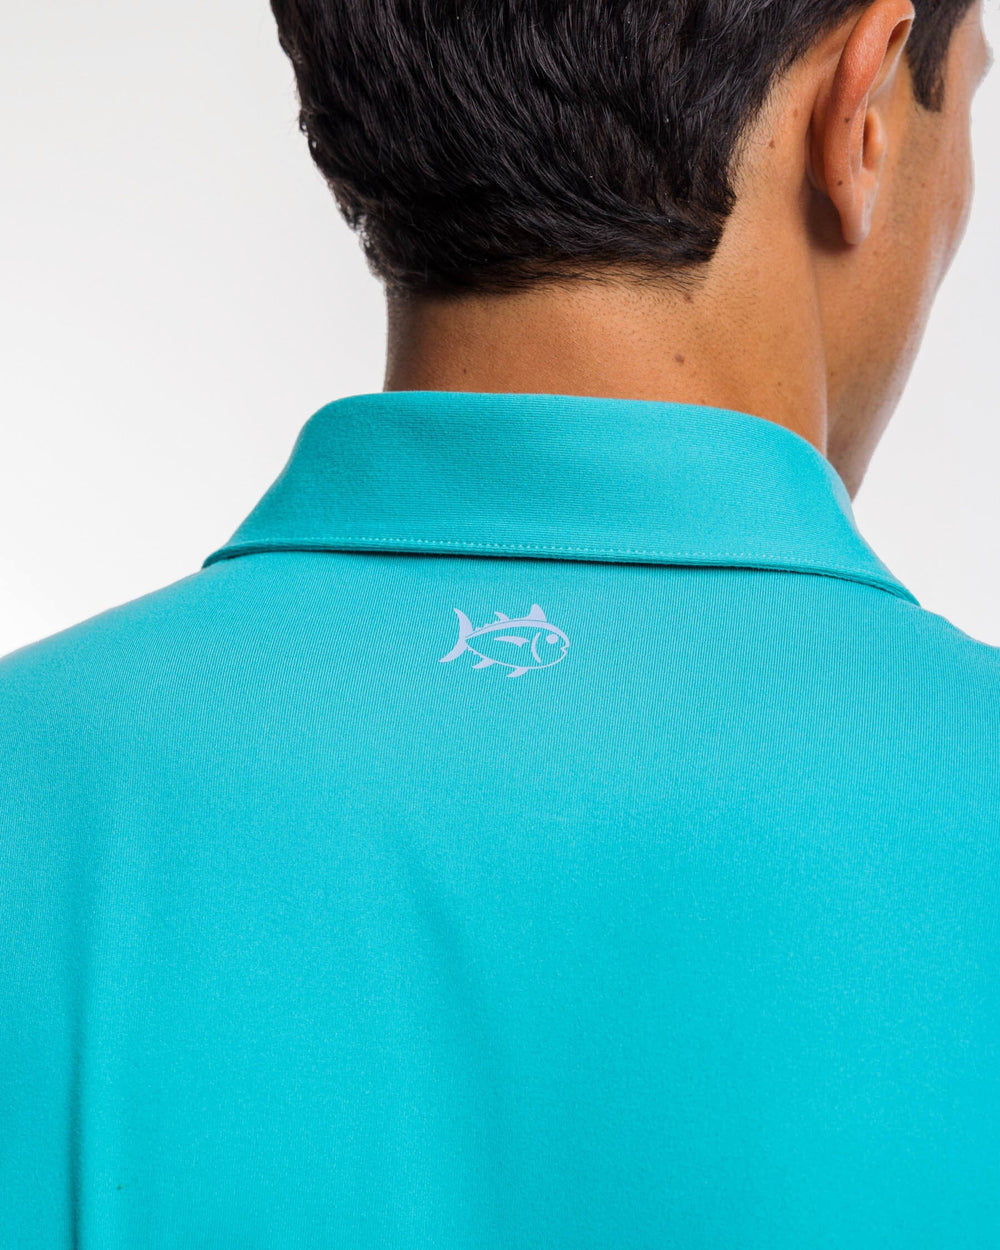 The yoke view of the Southern Tide Ryder Lilly Polo Shirt by Southern Tide - Water Lilly Green